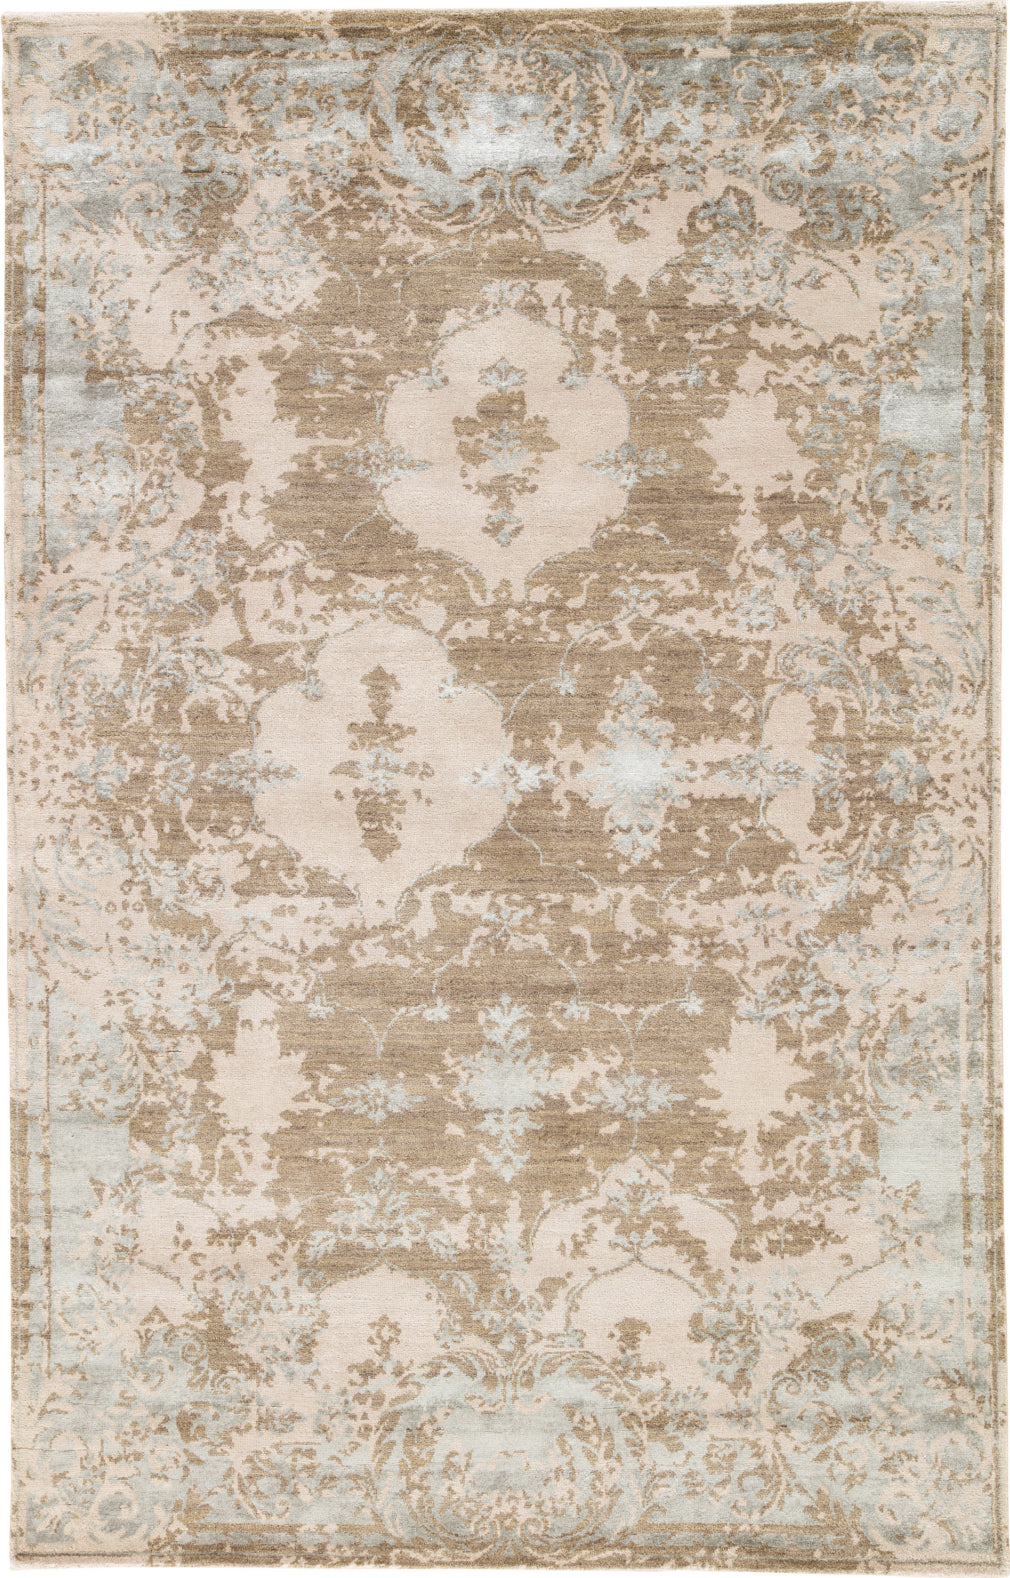 Jaipur Living Connextion-Global Versailles CG09 Gray/Ivory Area Rug by Jenny Jones - Top Down